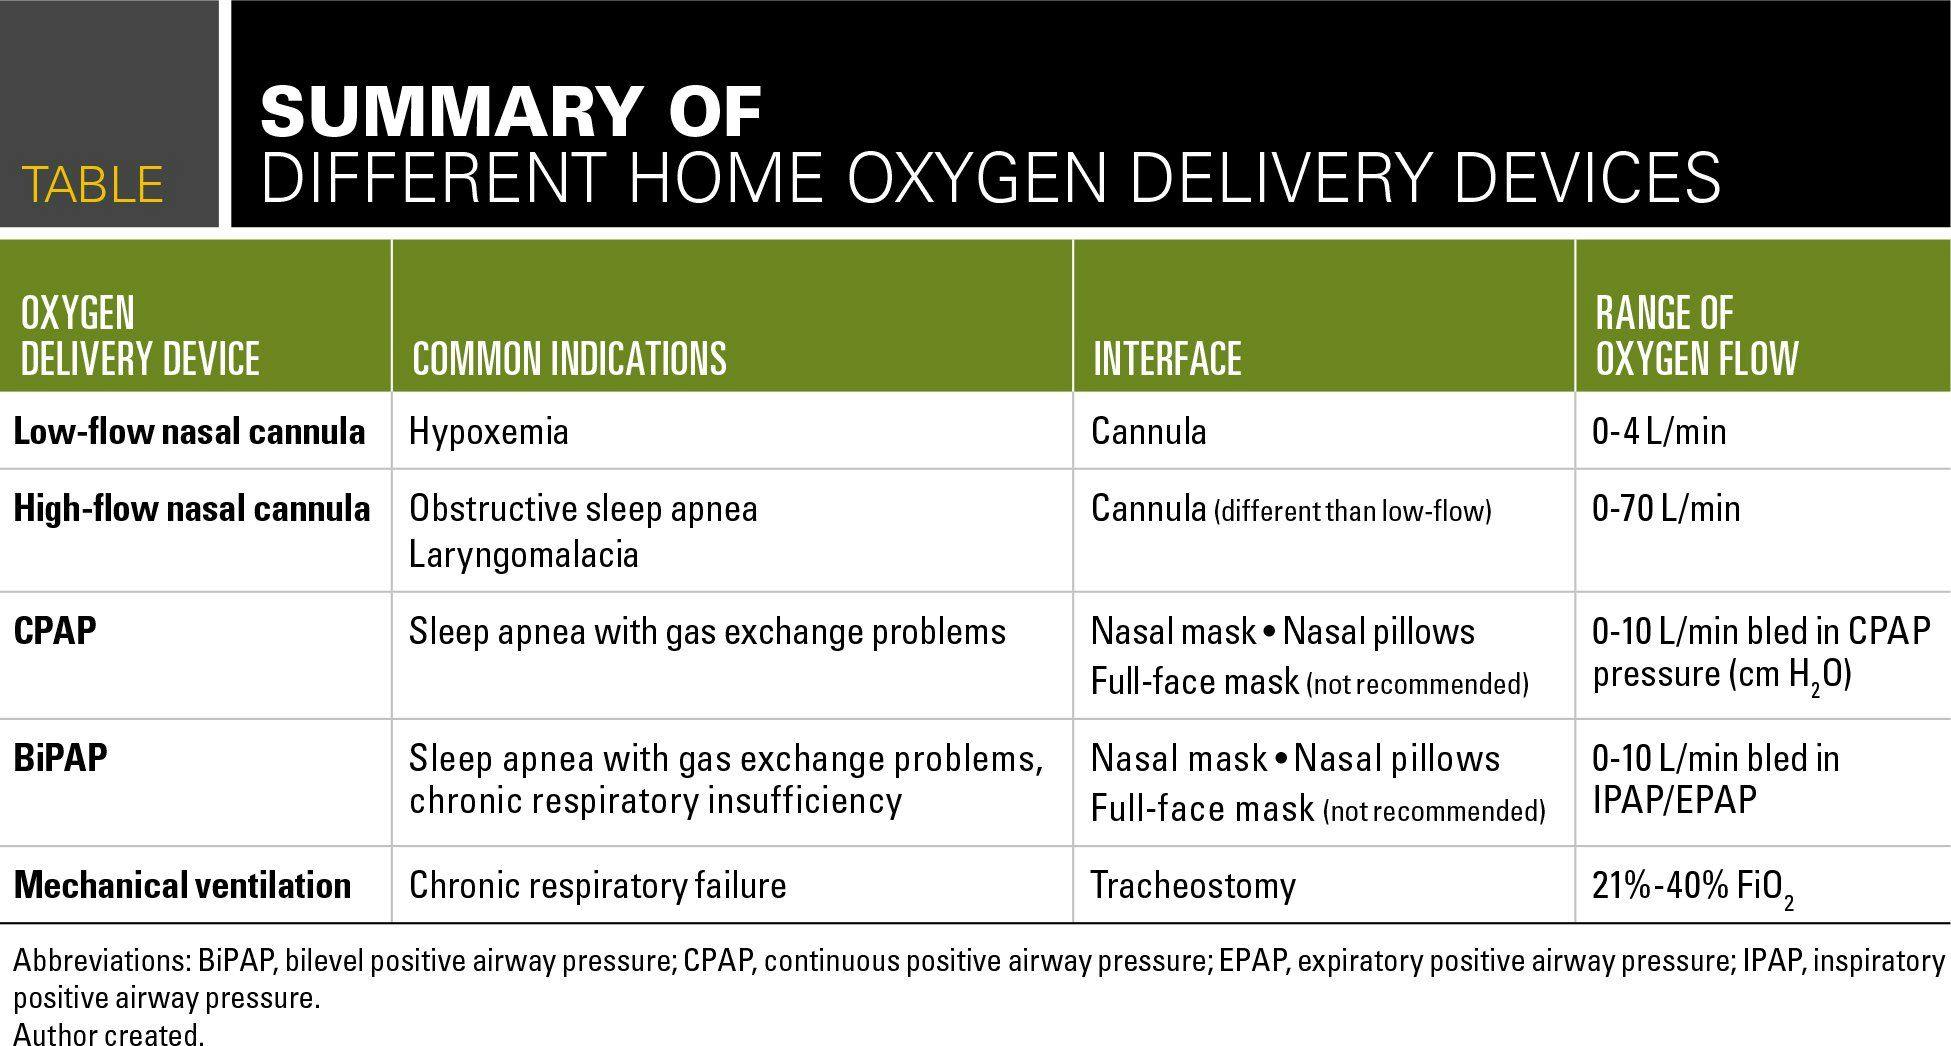 Summary of different home oxygen delivery devices